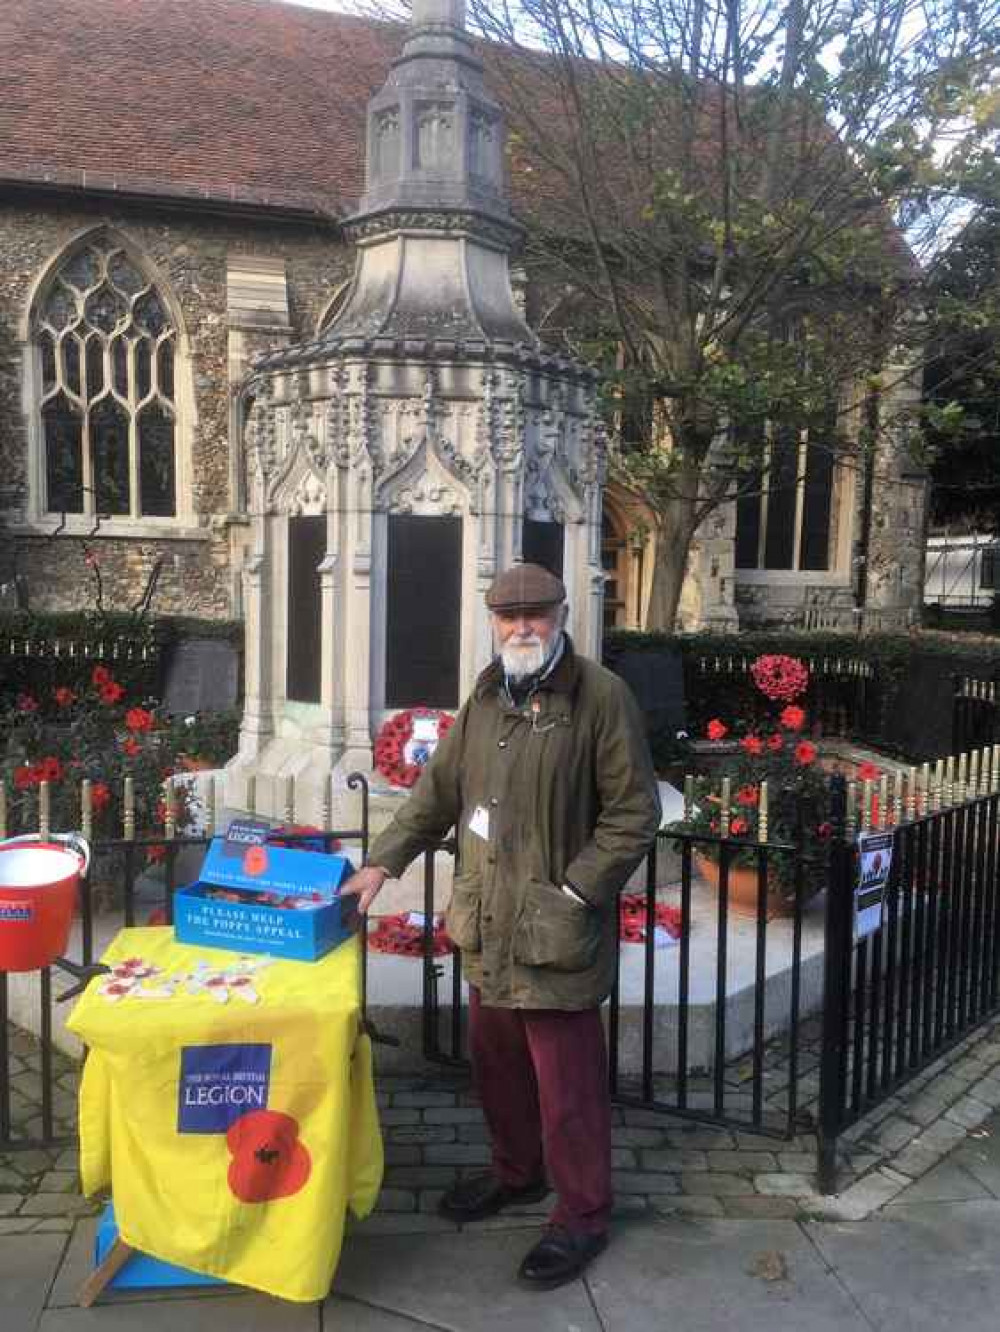 Douglas Scurrey has been selling poppies in Maldon for 20 years